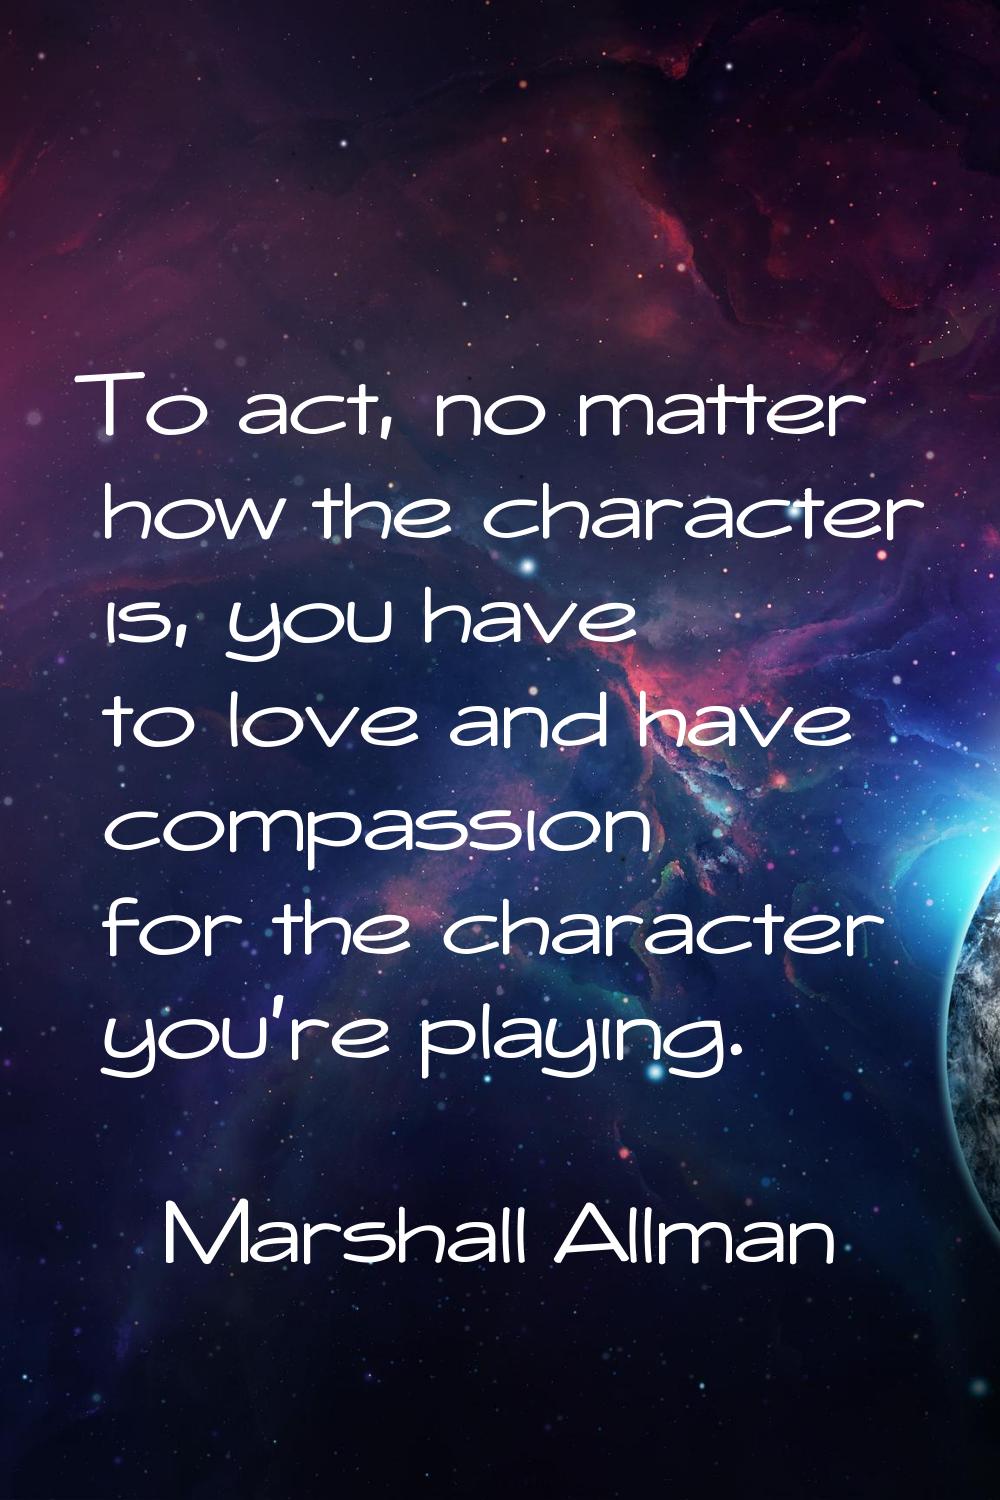 To act, no matter how the character is, you have to love and have compassion for the character you'